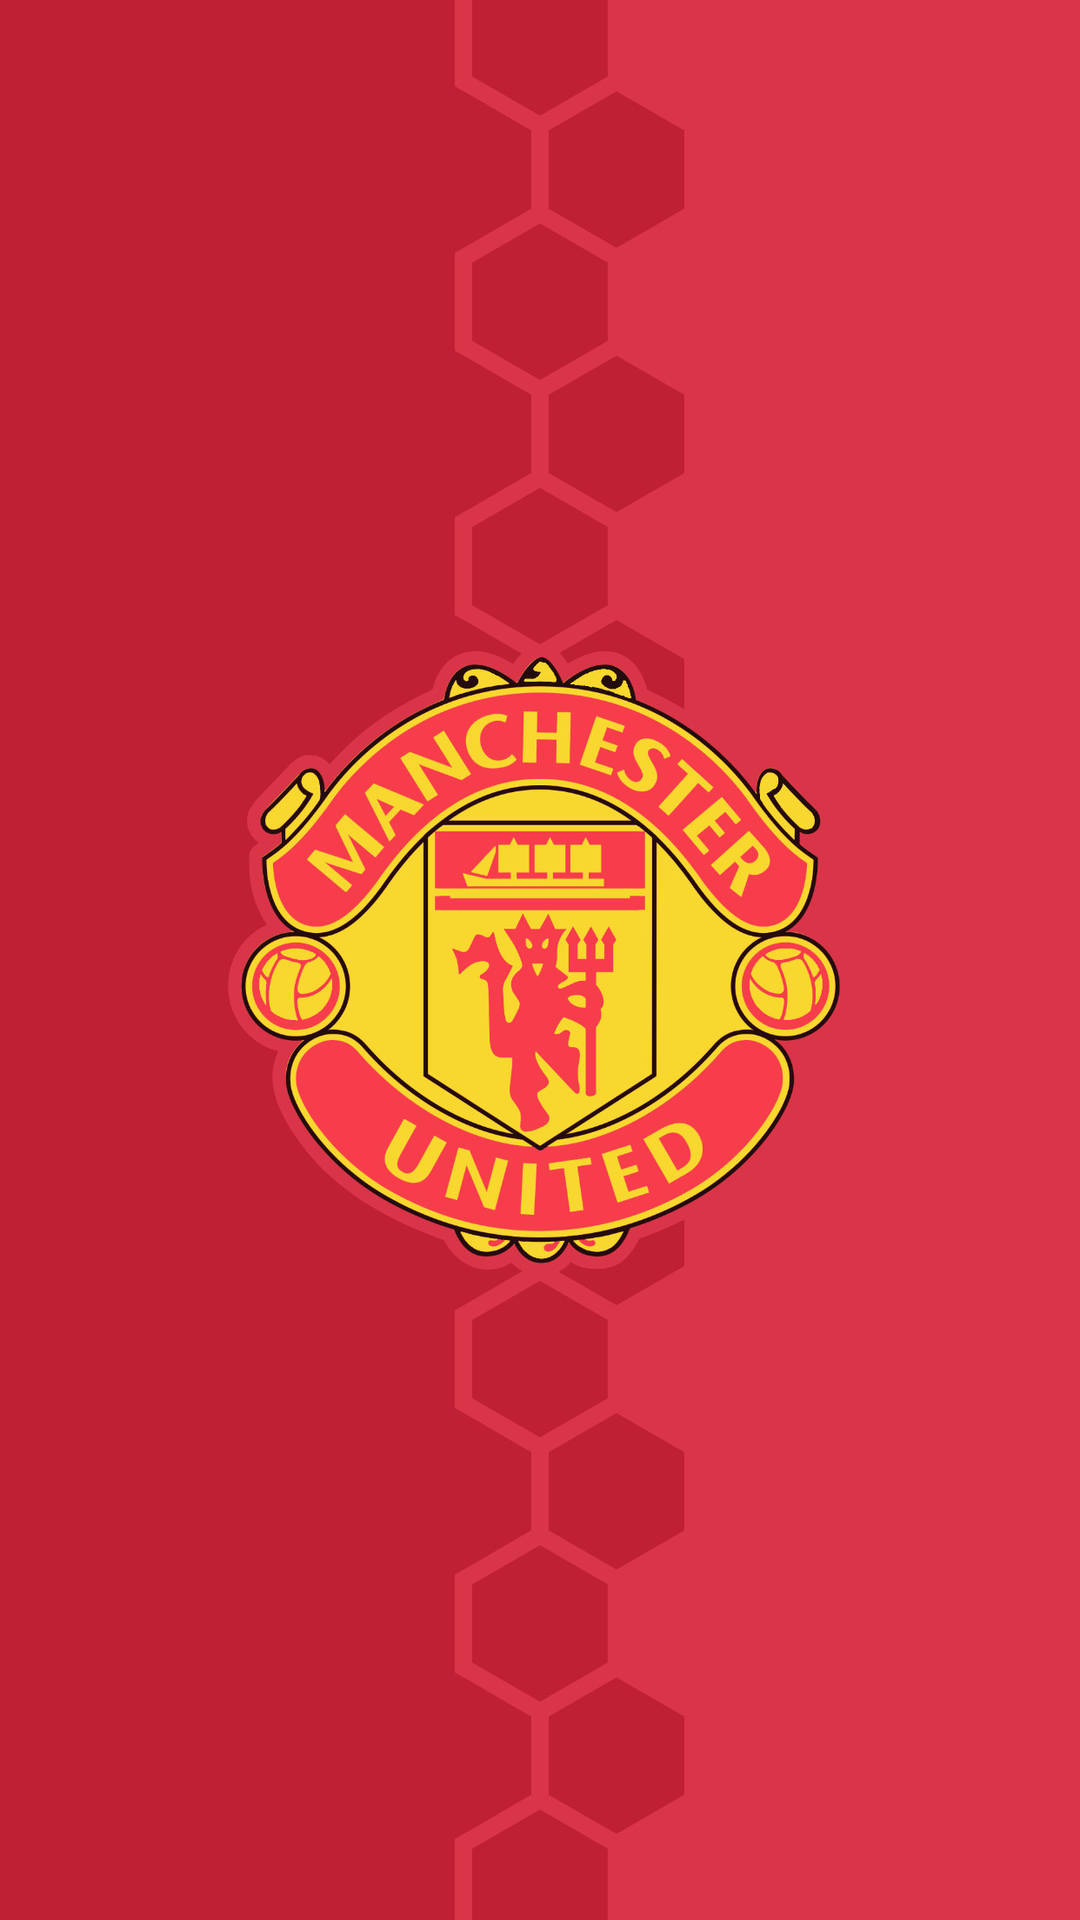 Manchester United Logo With Red Hexagons Background